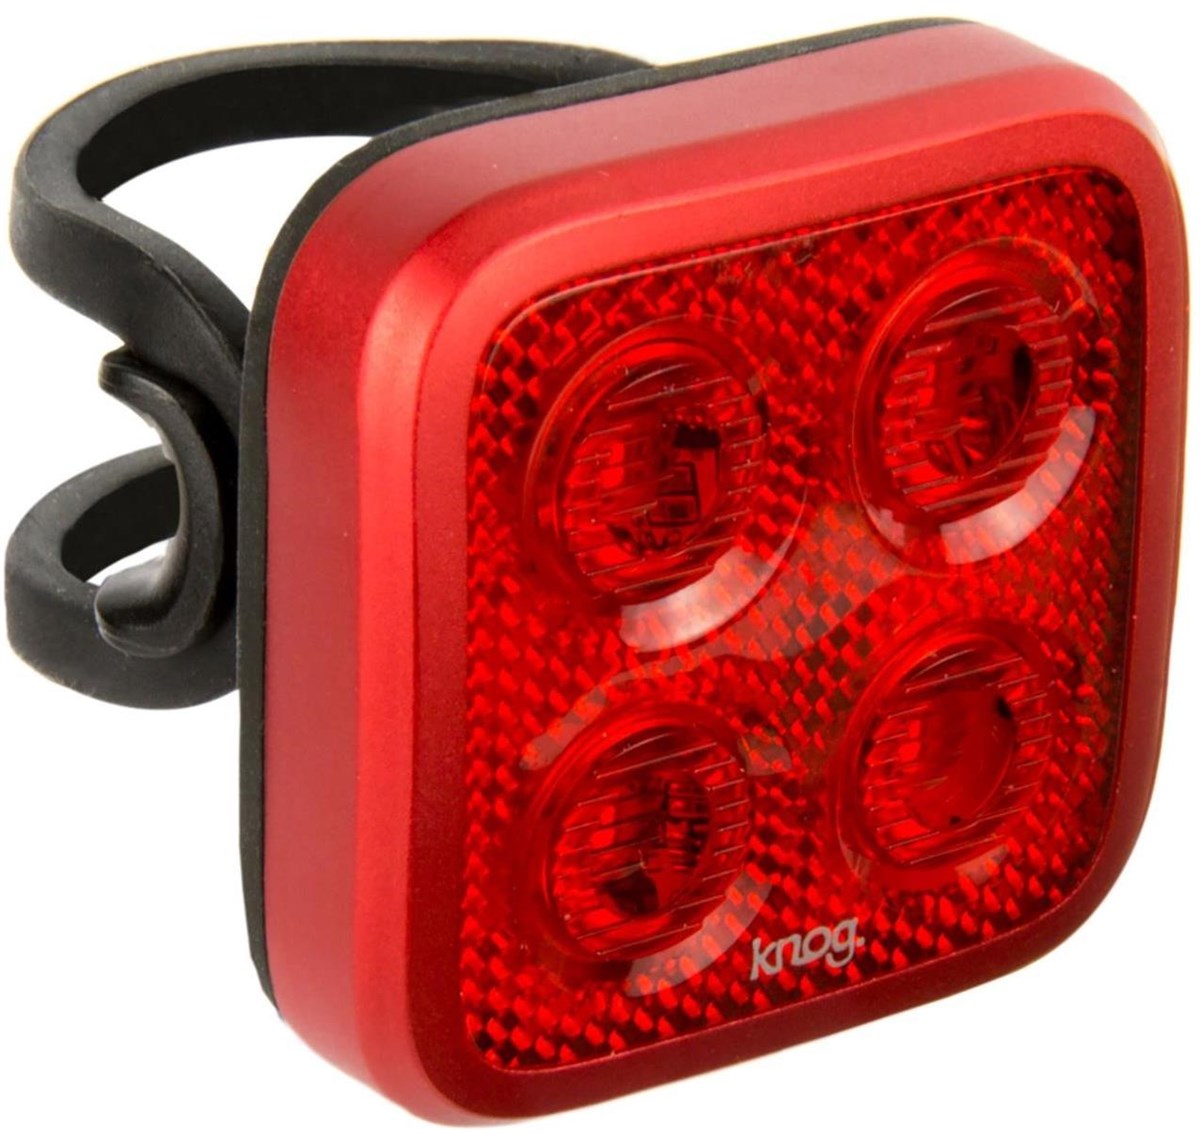 Knog Blinder Mob Four Eyes USB Rechargeable Rear Light product image